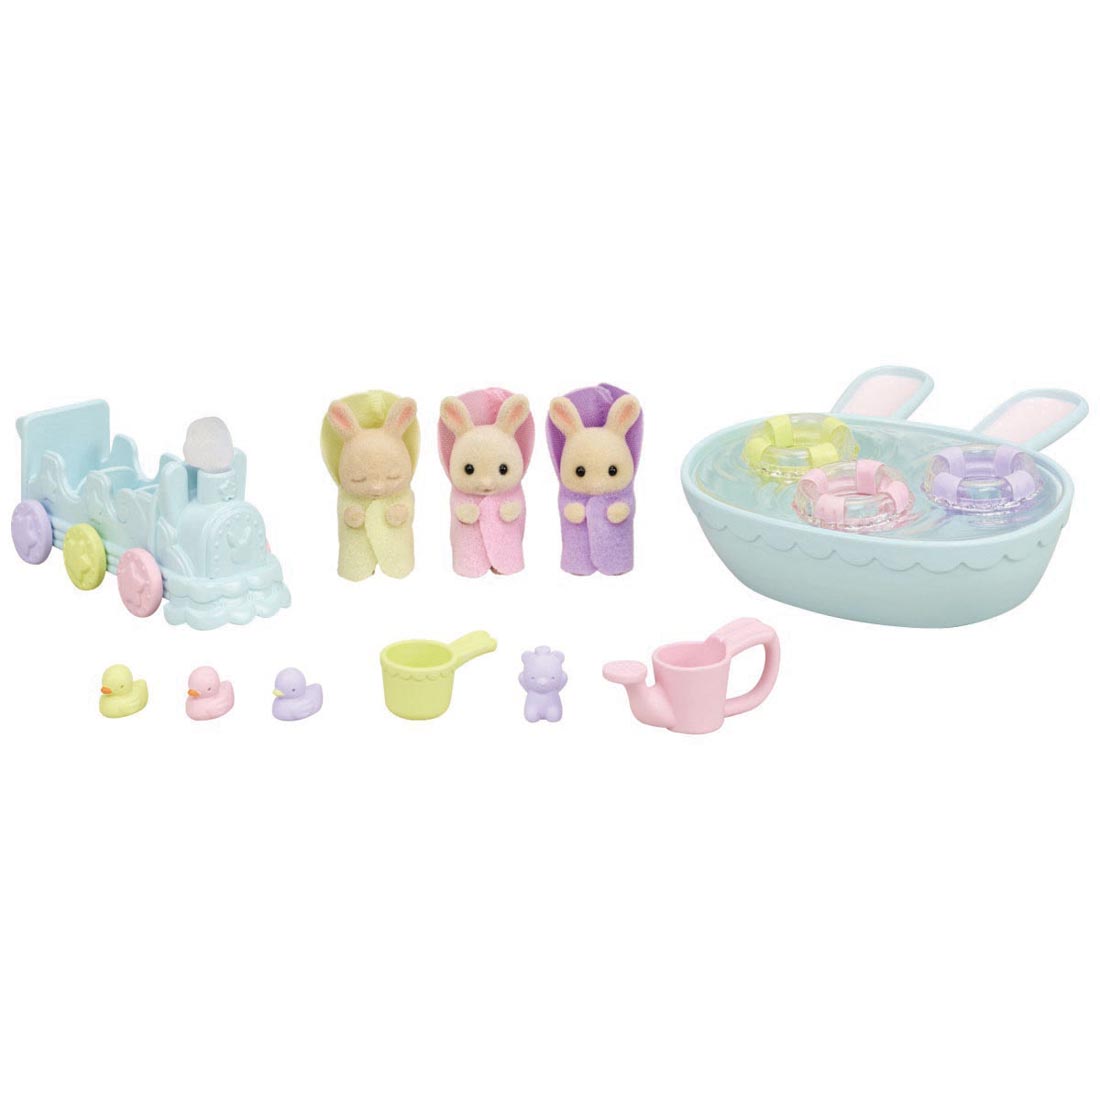 pieces from the Calico Critters Triplets Baby Bathtime Set